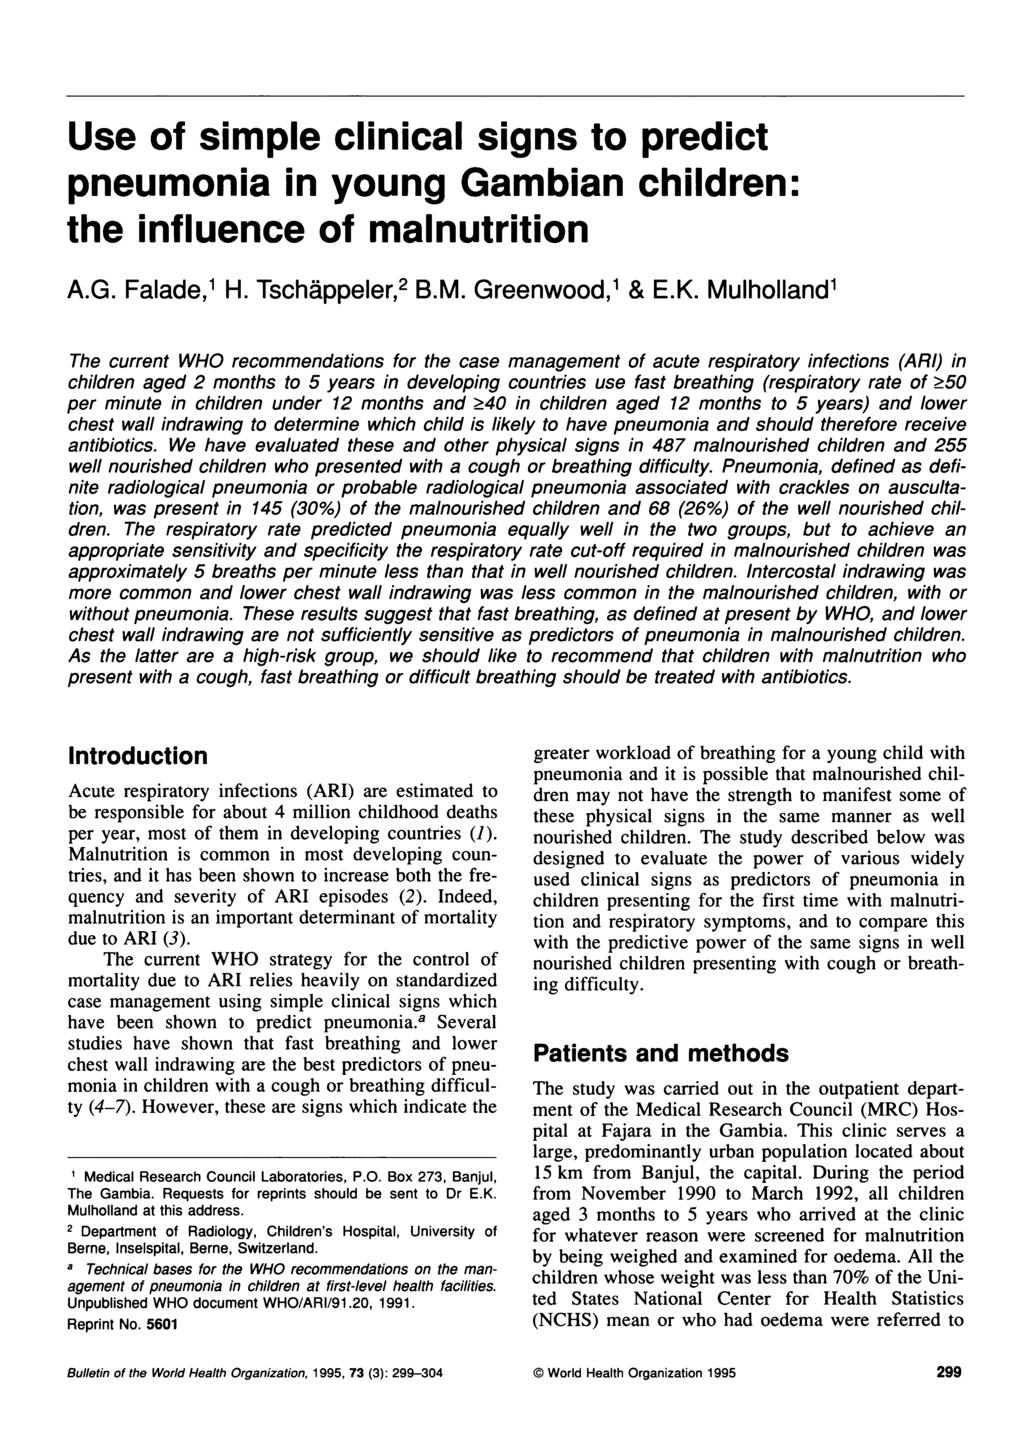 Use of simple clinical signs to predict pneumonia in young Gambian children: the influence of malnutrition A.G. Falade,1 H. Tschappeler,2 B.M. Greenwood,1 & E.K.